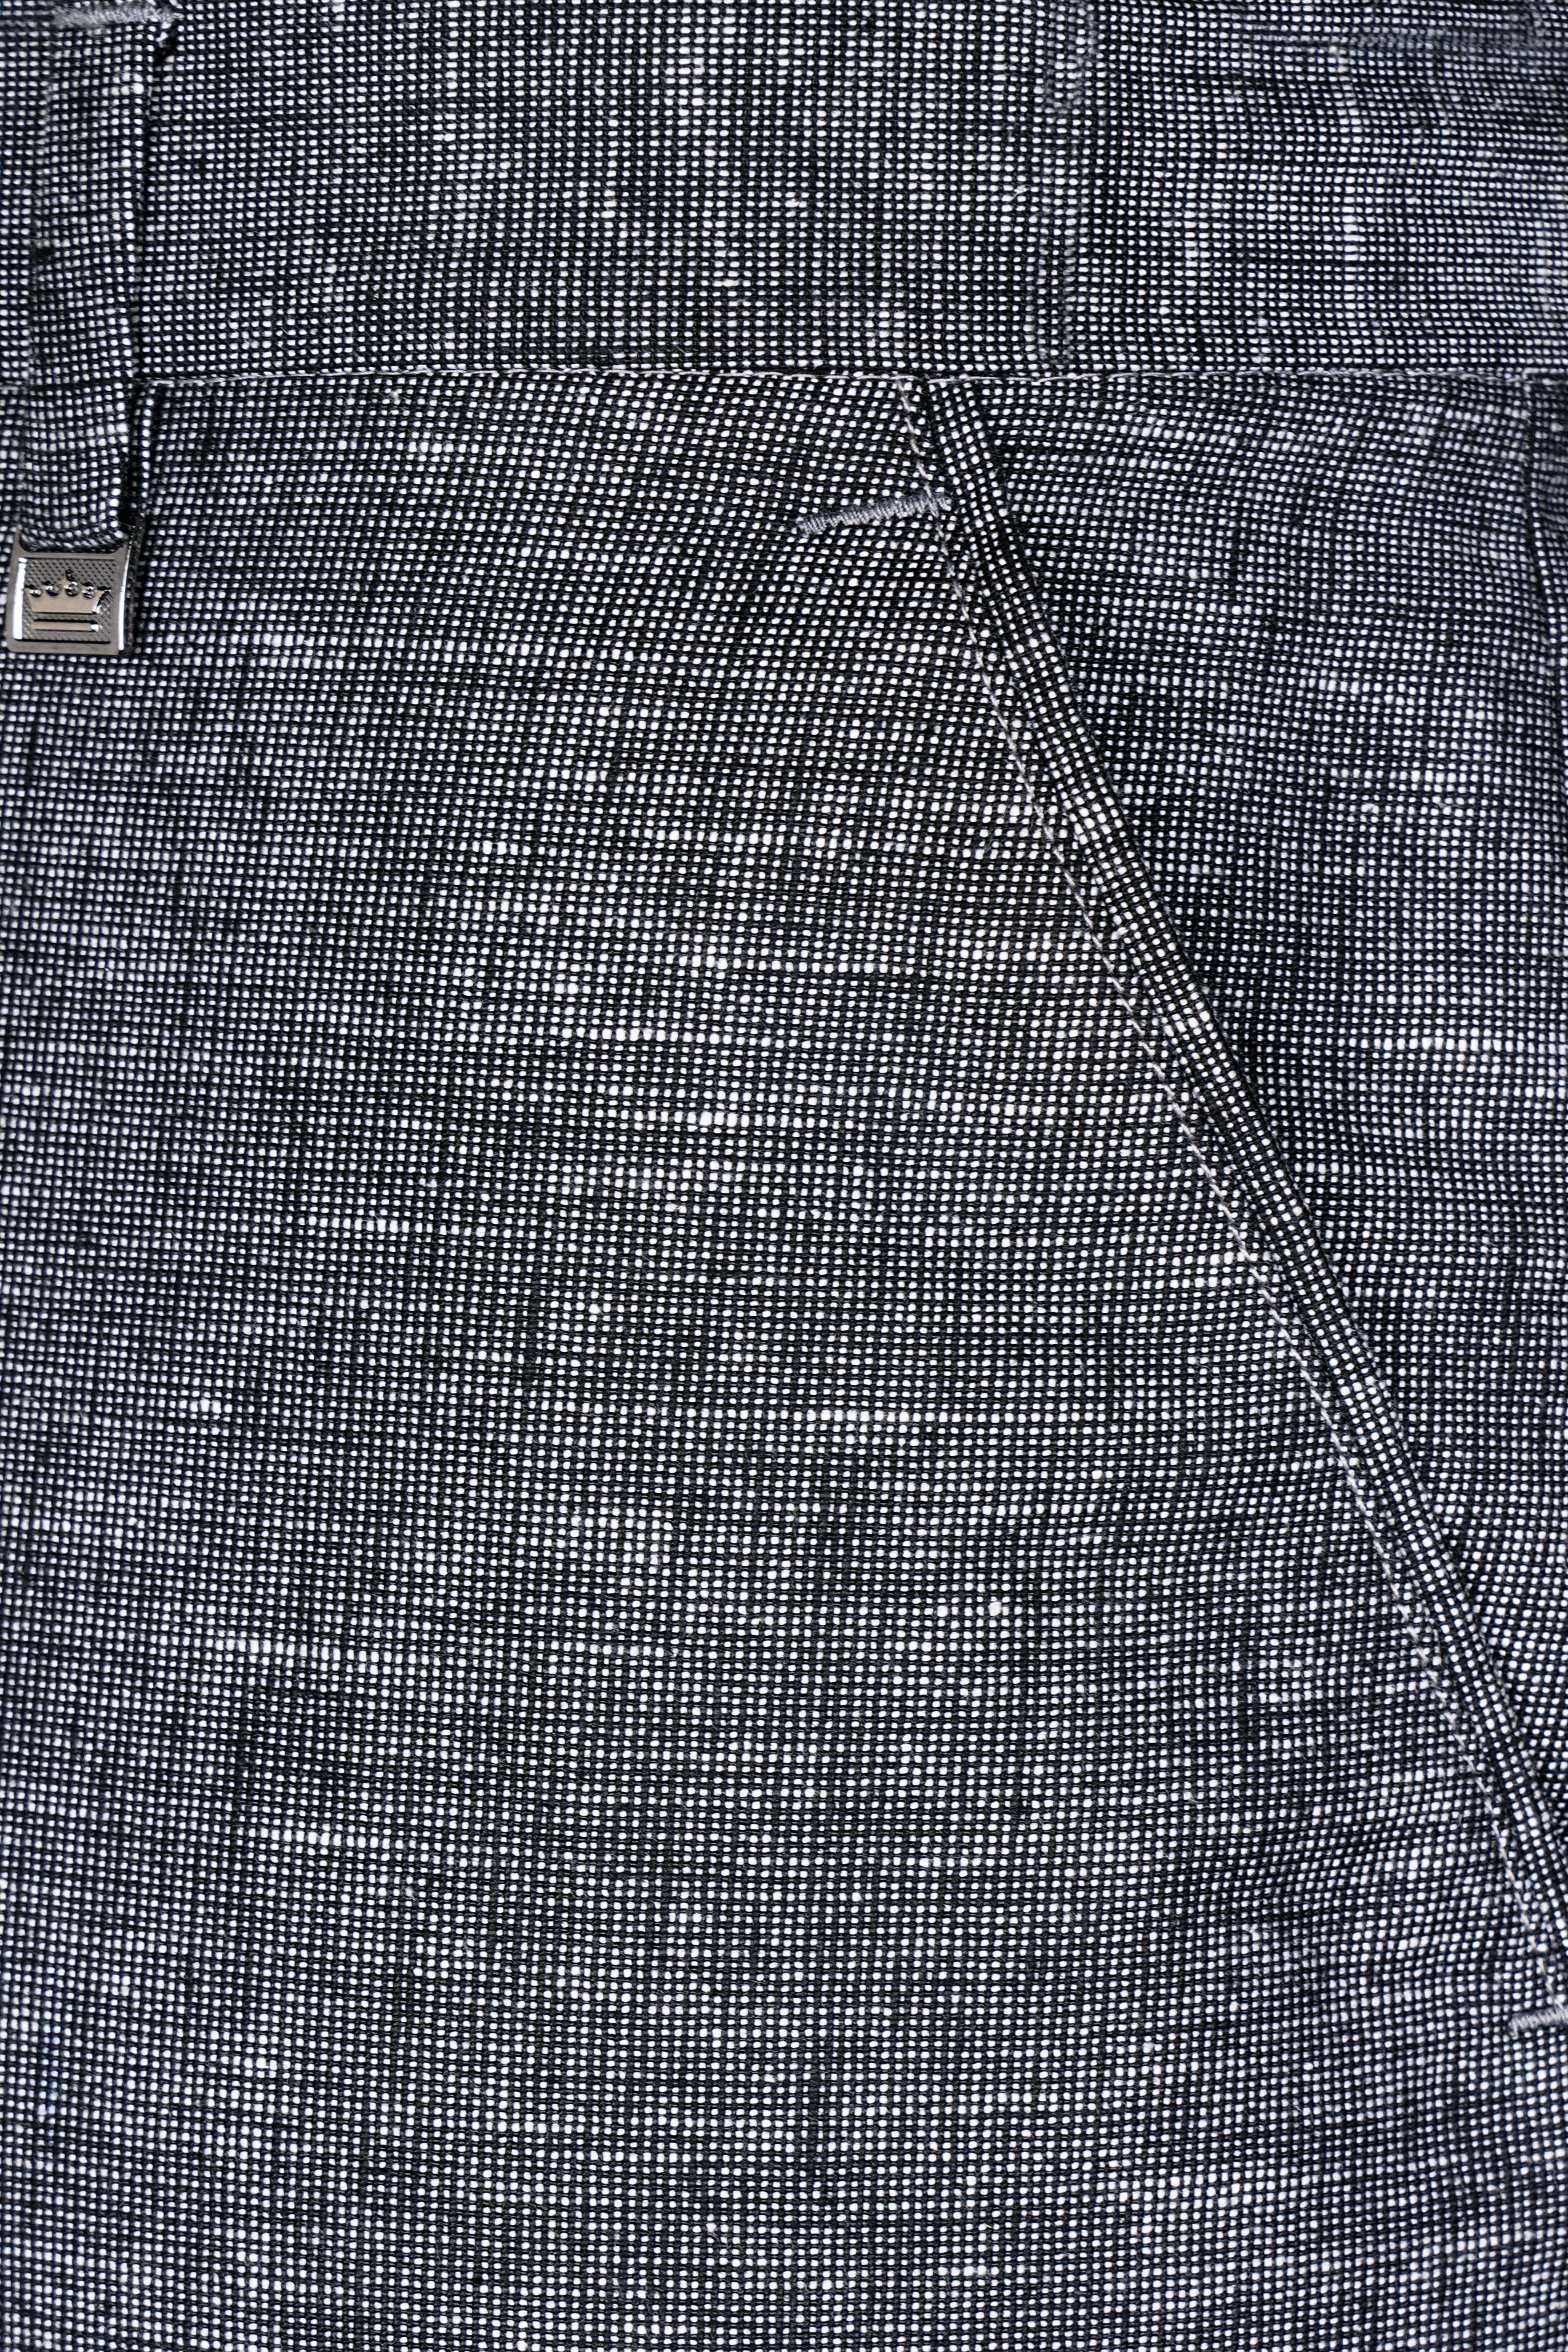 Dim Gray Luxurious Linen Single Breasted Suit ST2923-SB-36, ST2923-SB-38, ST2923-SB-40, ST2923-SB-42, ST2923-SB-44, ST2923-SB-46, ST2923-SB-48, ST2923-SB-50, ST2923-SB-52, ST2923-SB-54, ST2923-SB-56, ST2923-SB-58, ST2923-SB-60